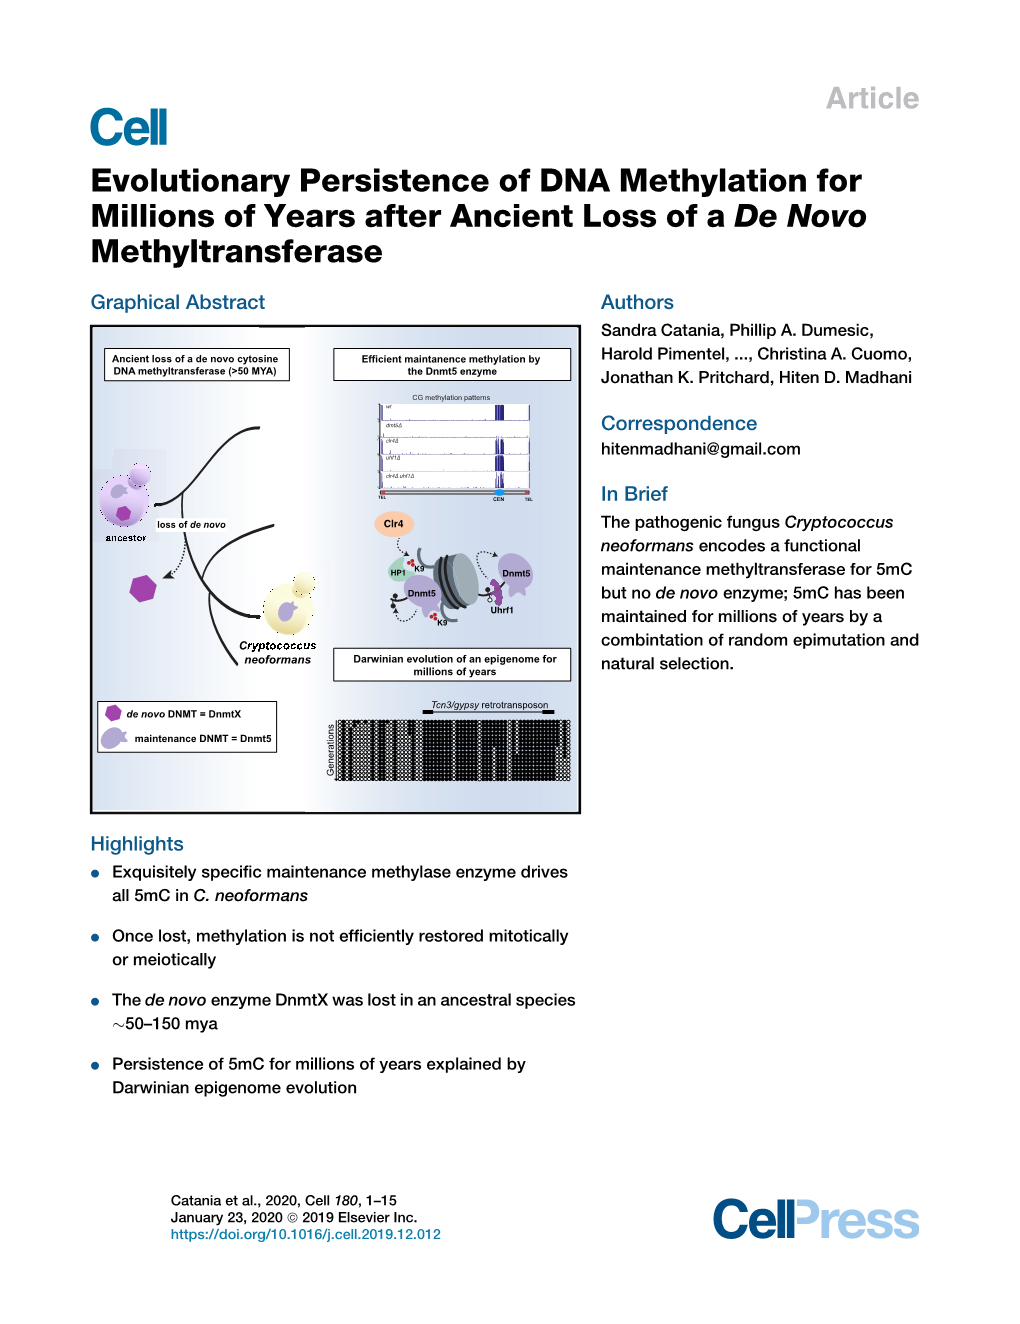 Evolutionary Persistence of DNA Methylation for Millions of Years After Ancient Loss of a De Novo Methyltransferase